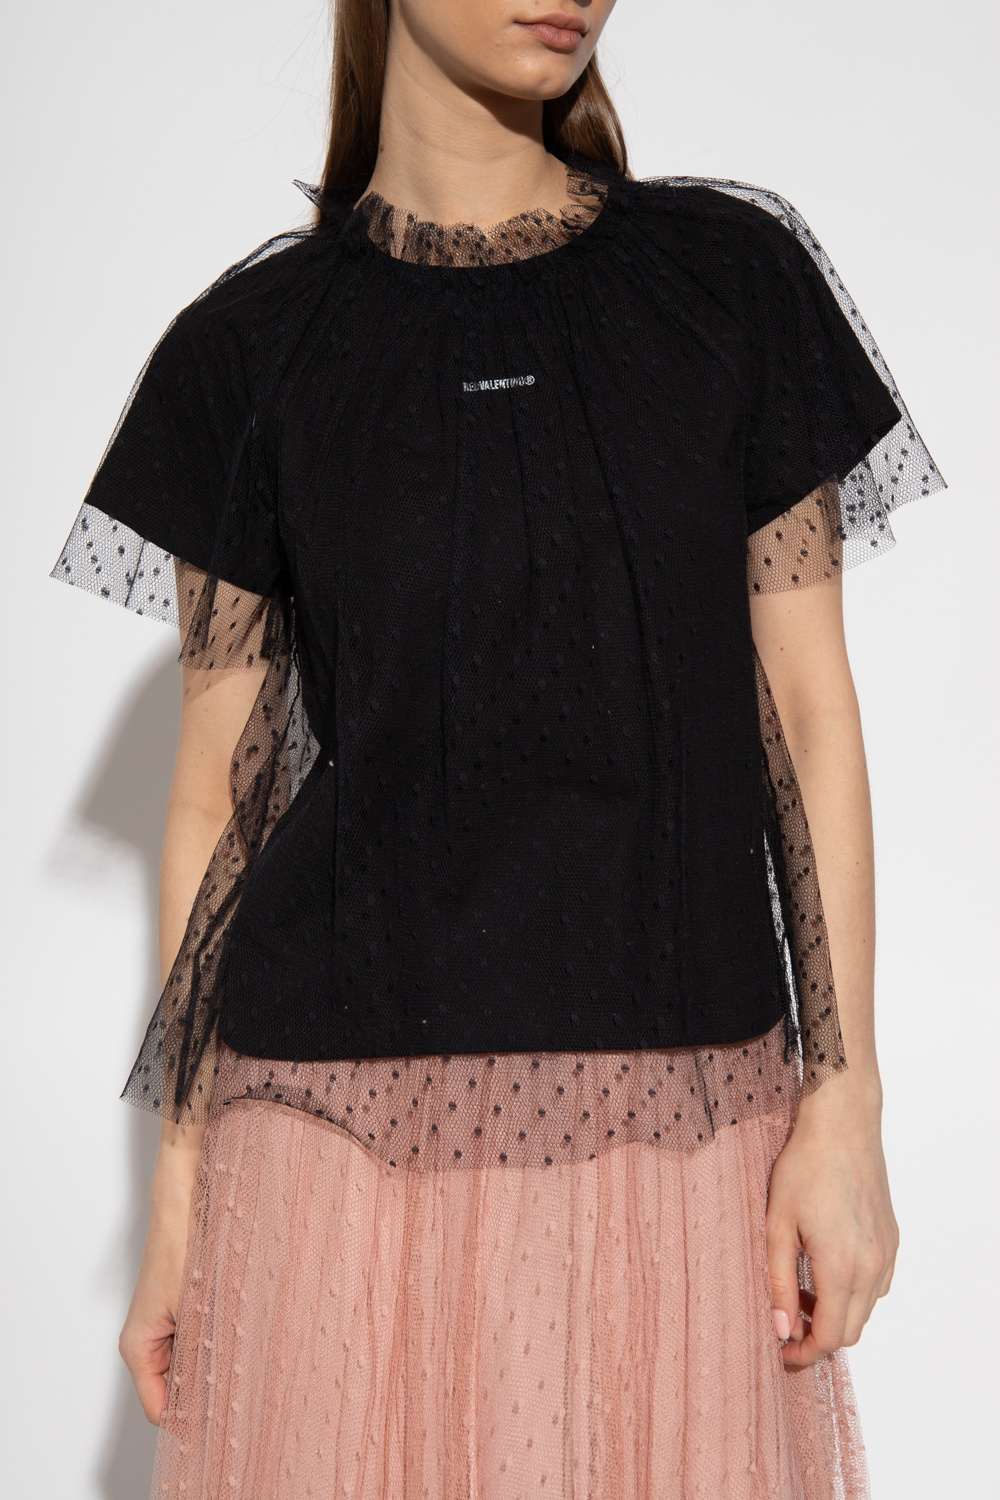 Red Valentino T-shirt with tulle trims